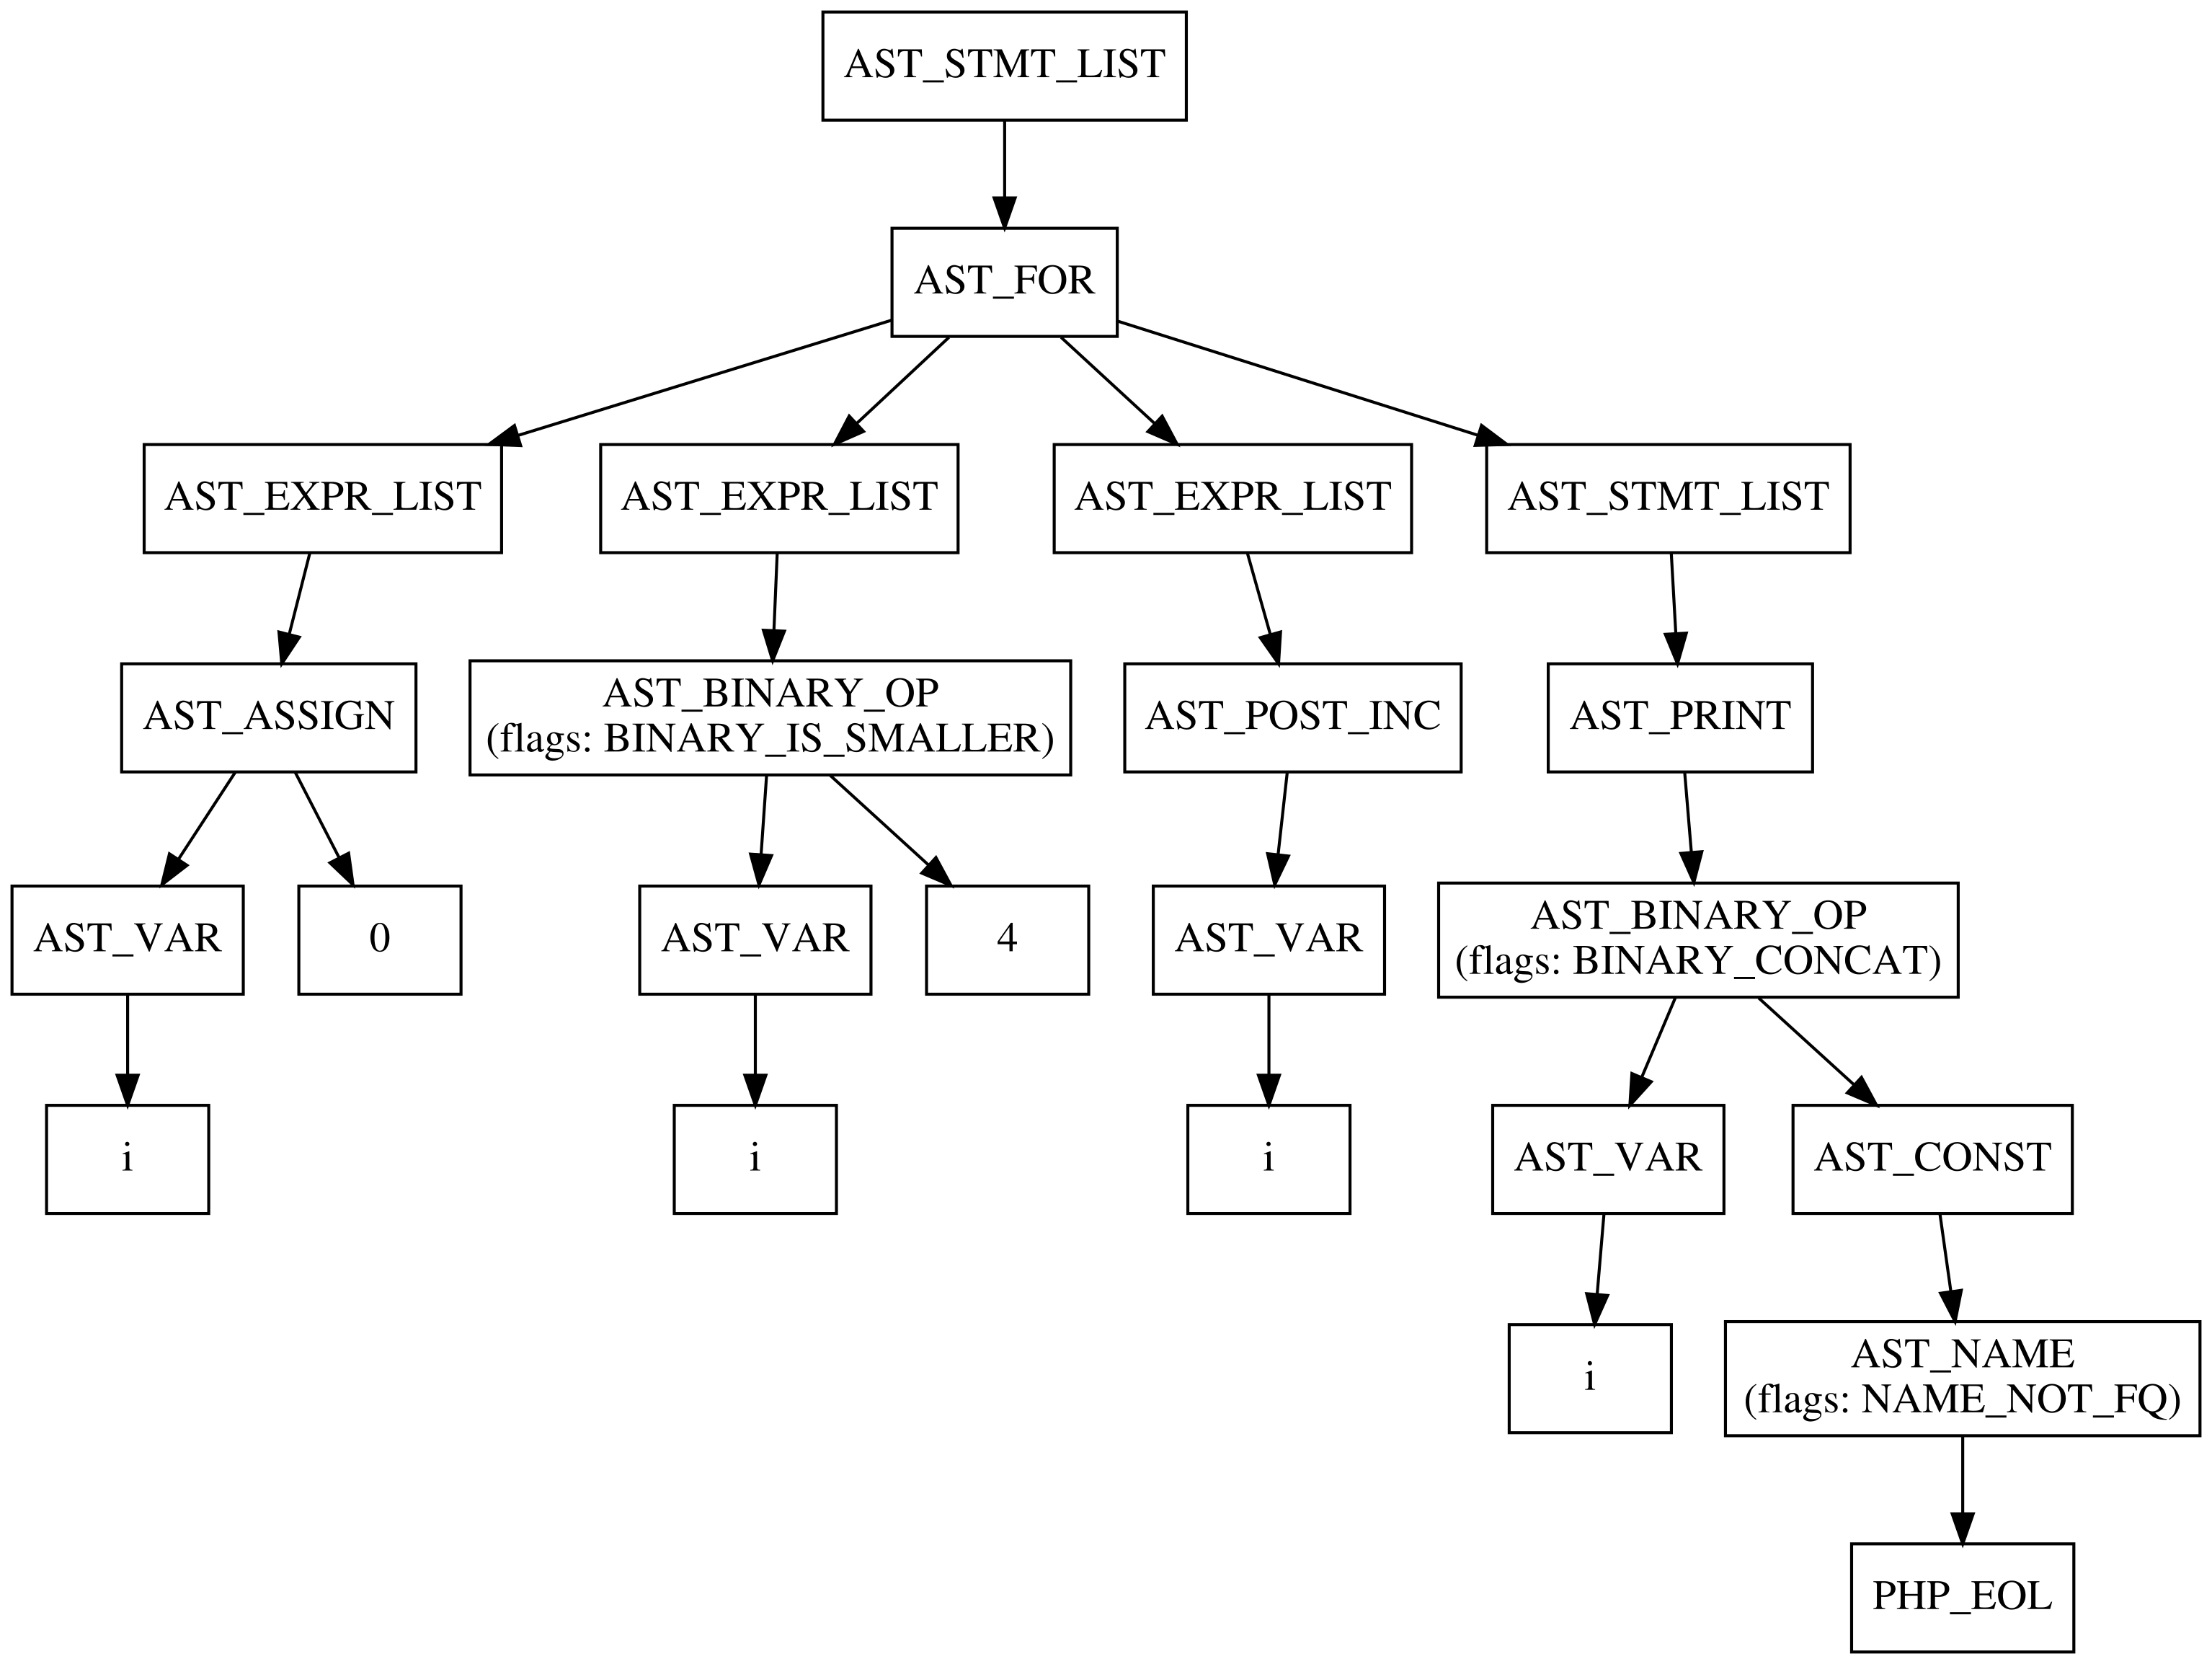 Abstract Syntax Tree (AST) for a for loop